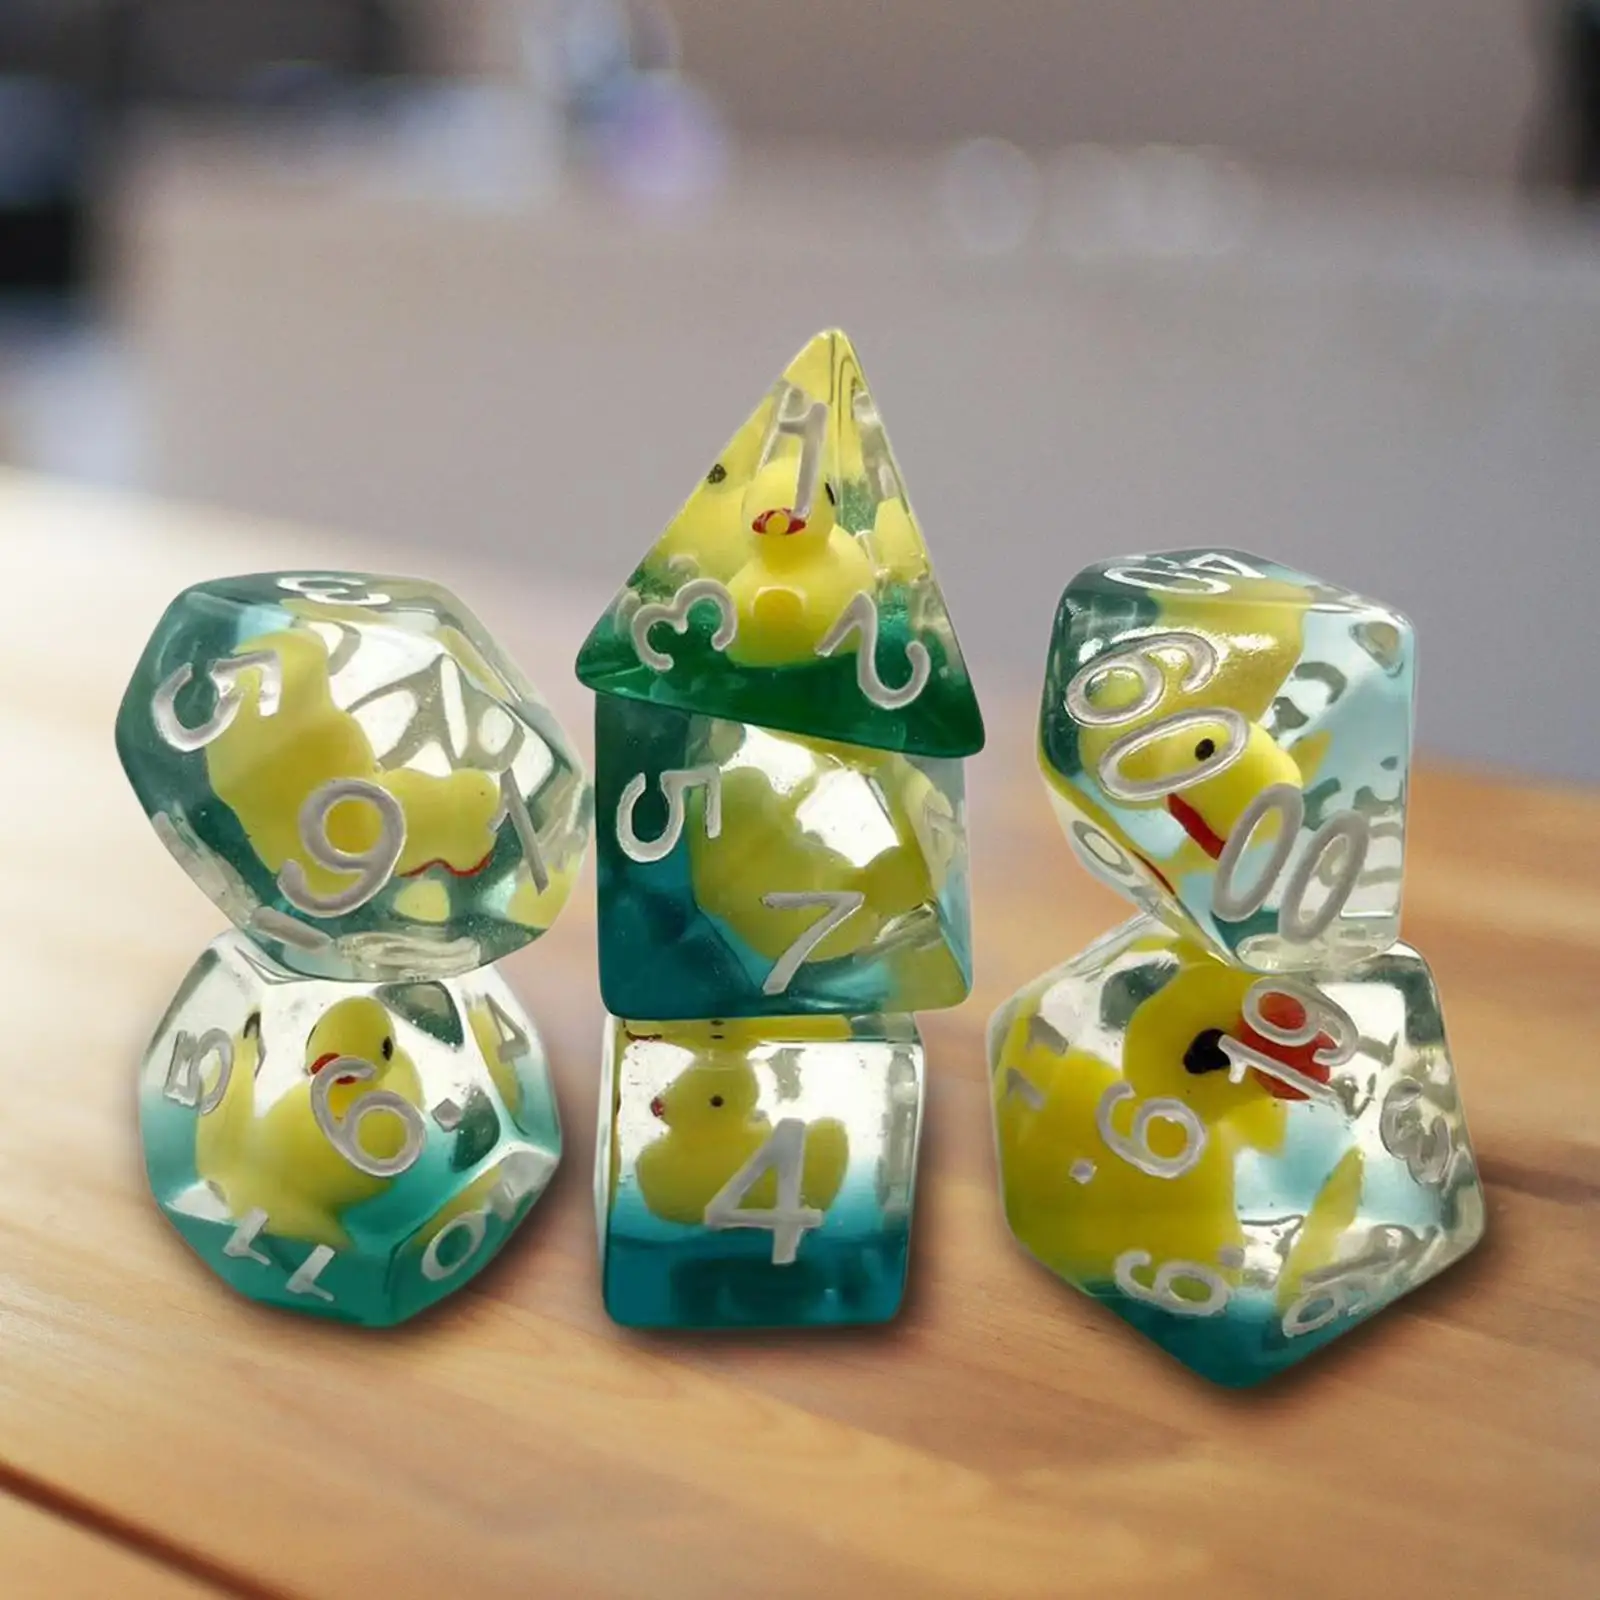 7 Pieces Acrylic Polyhedral Dices Set Bar Toys Filled with Ducks D4-D20 for MTG Role Playing RPG Card Games Table Games